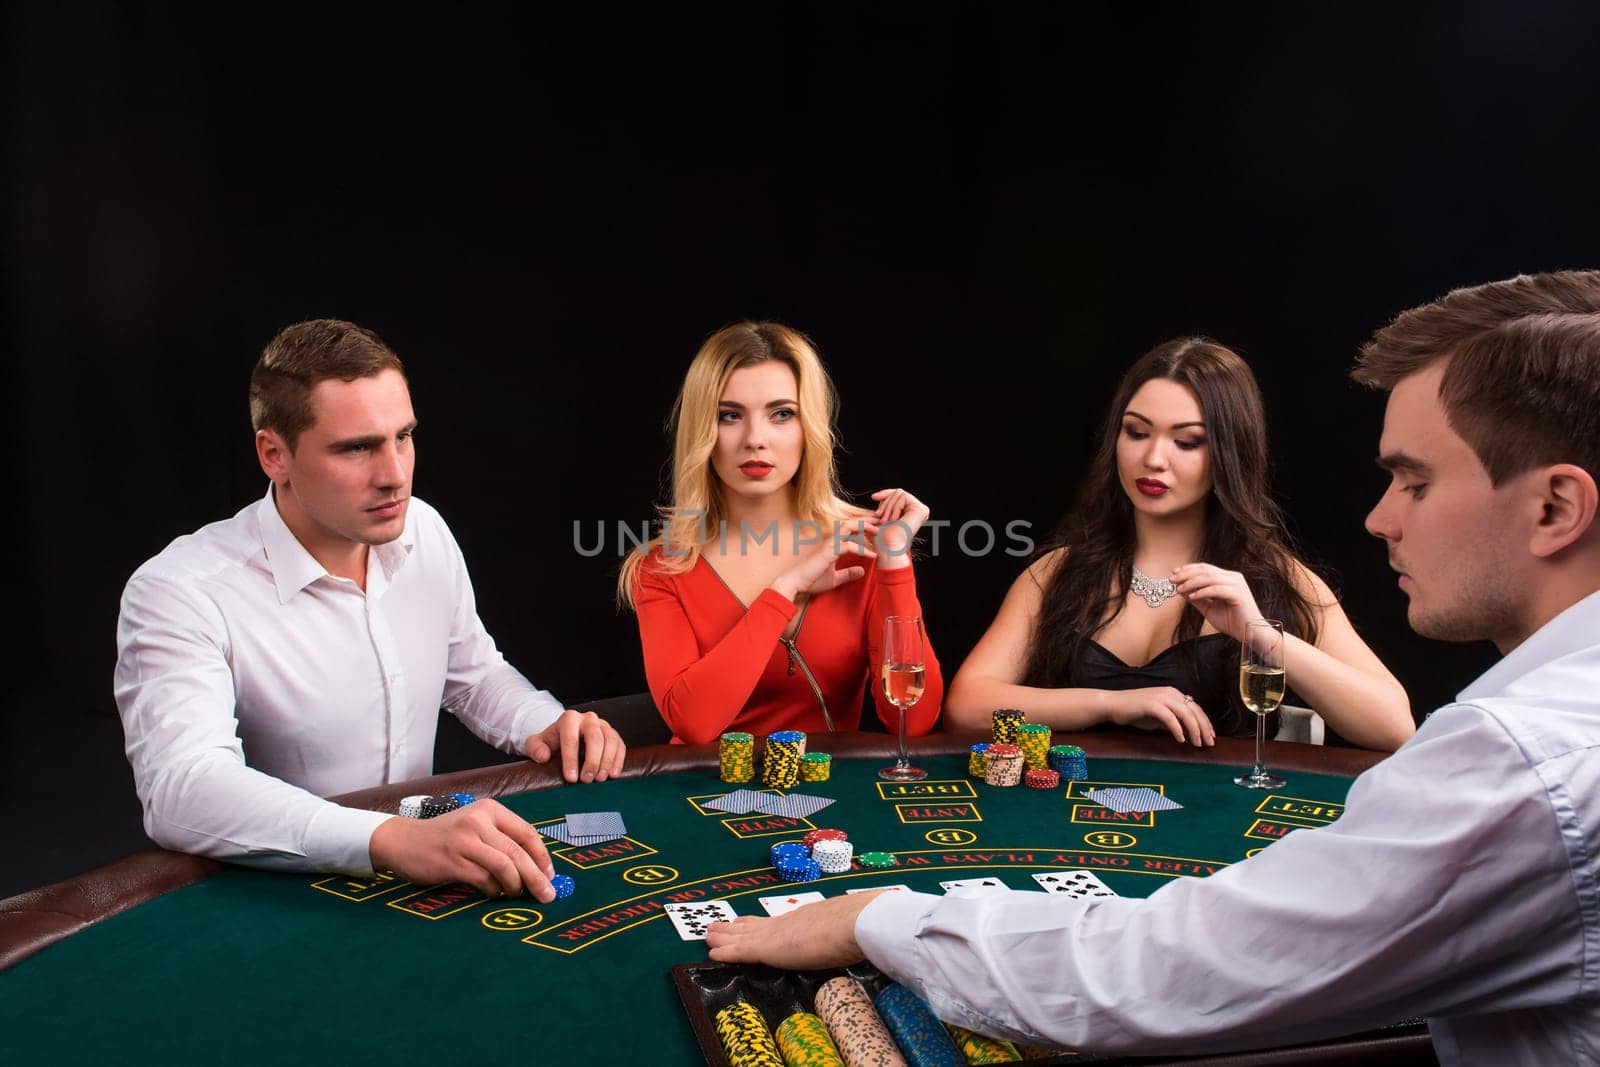 Friends enjoying a gambling night. Young people sit at the game table. The dealer deals the cards